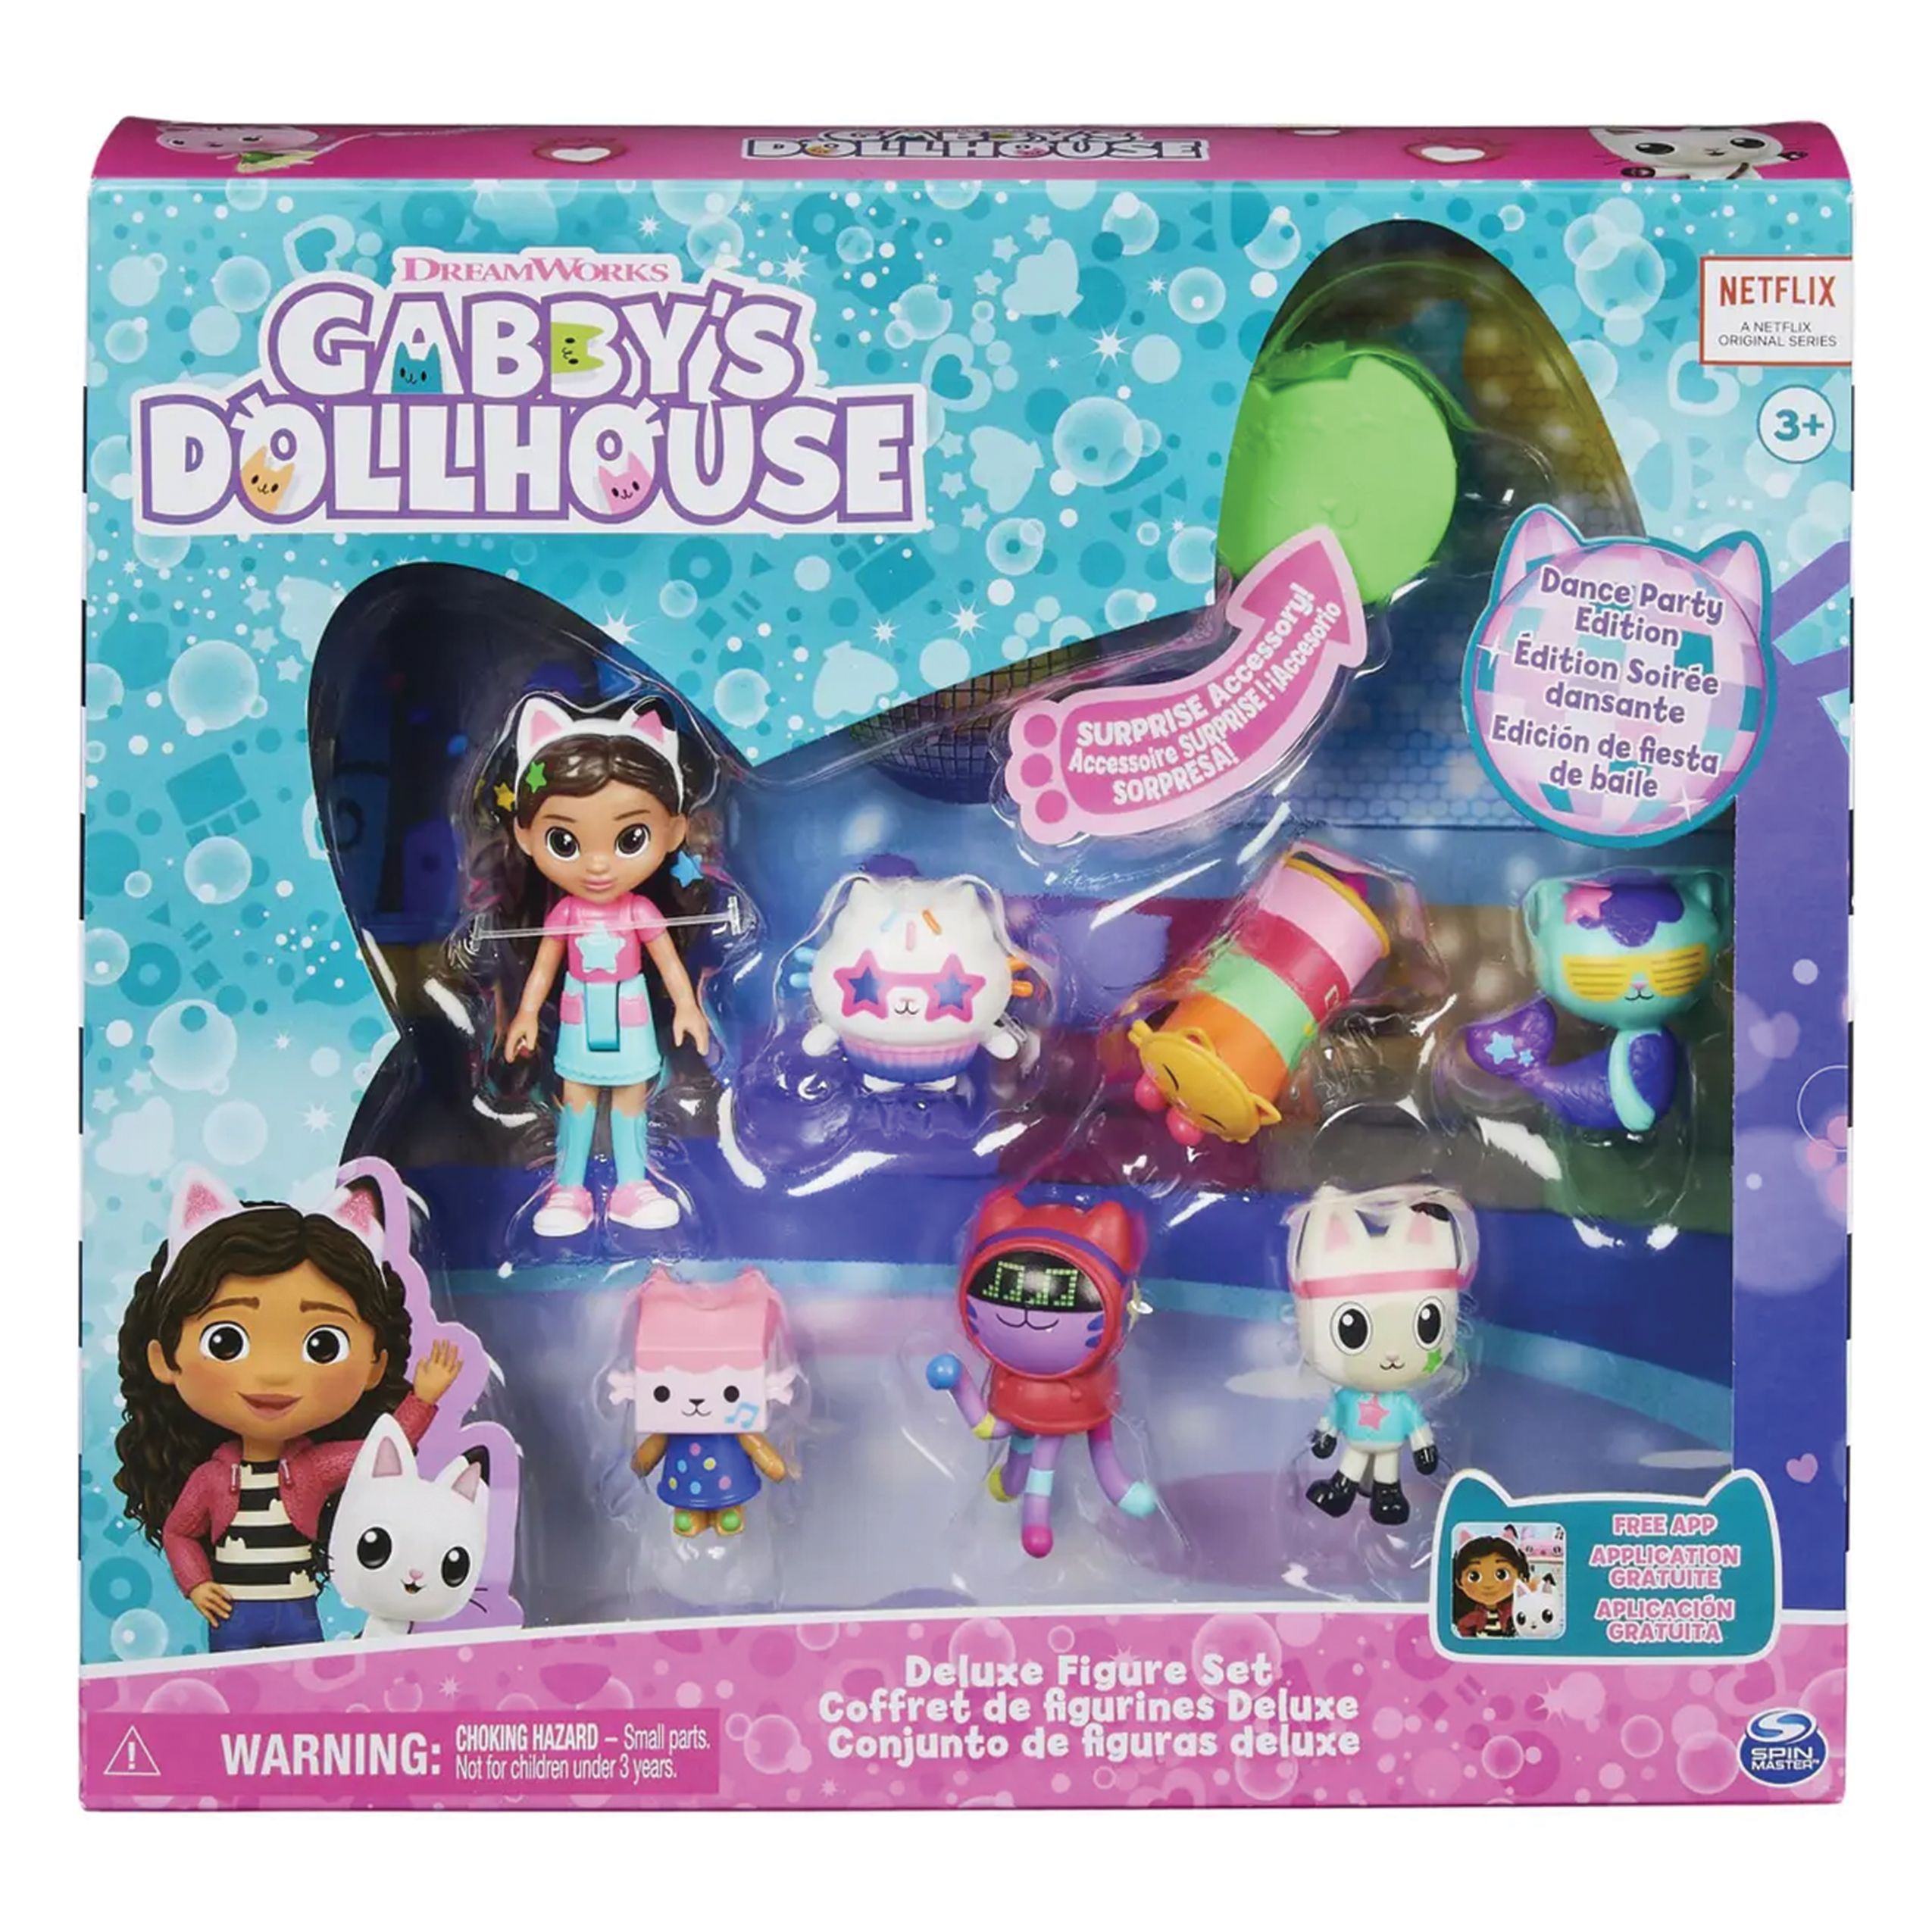 Gabby's Dollhouse - Deluxe Figure Gift Set with 7 Toy Figures and